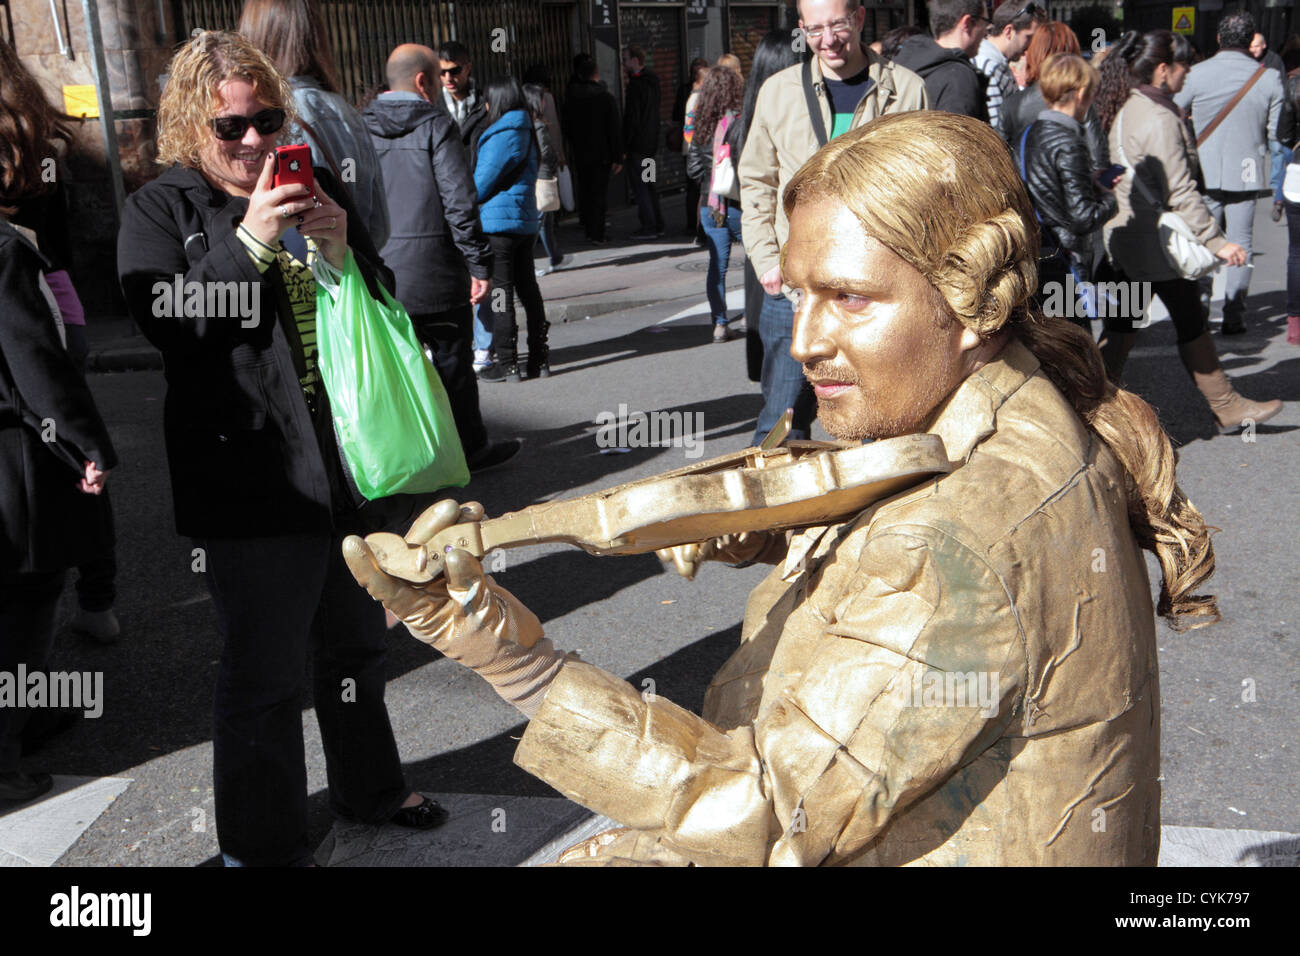 Gold painted man living statue street entertainer, classical musician posing with violin, Madrid, Spain Stock Photo